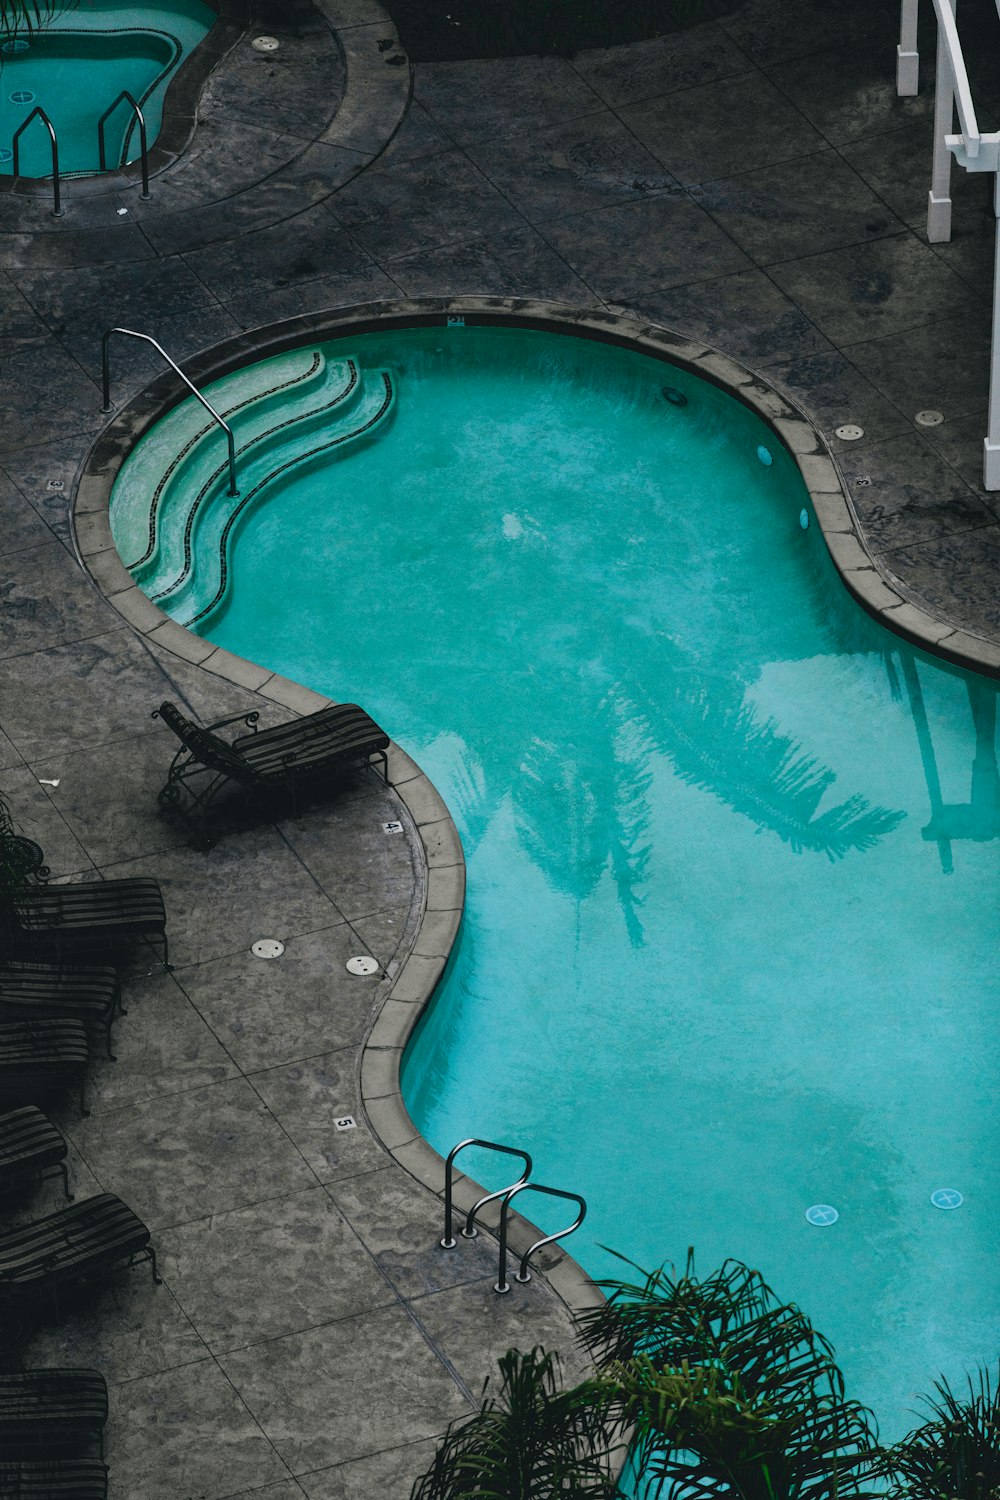 A well-designed stunning swimming pool